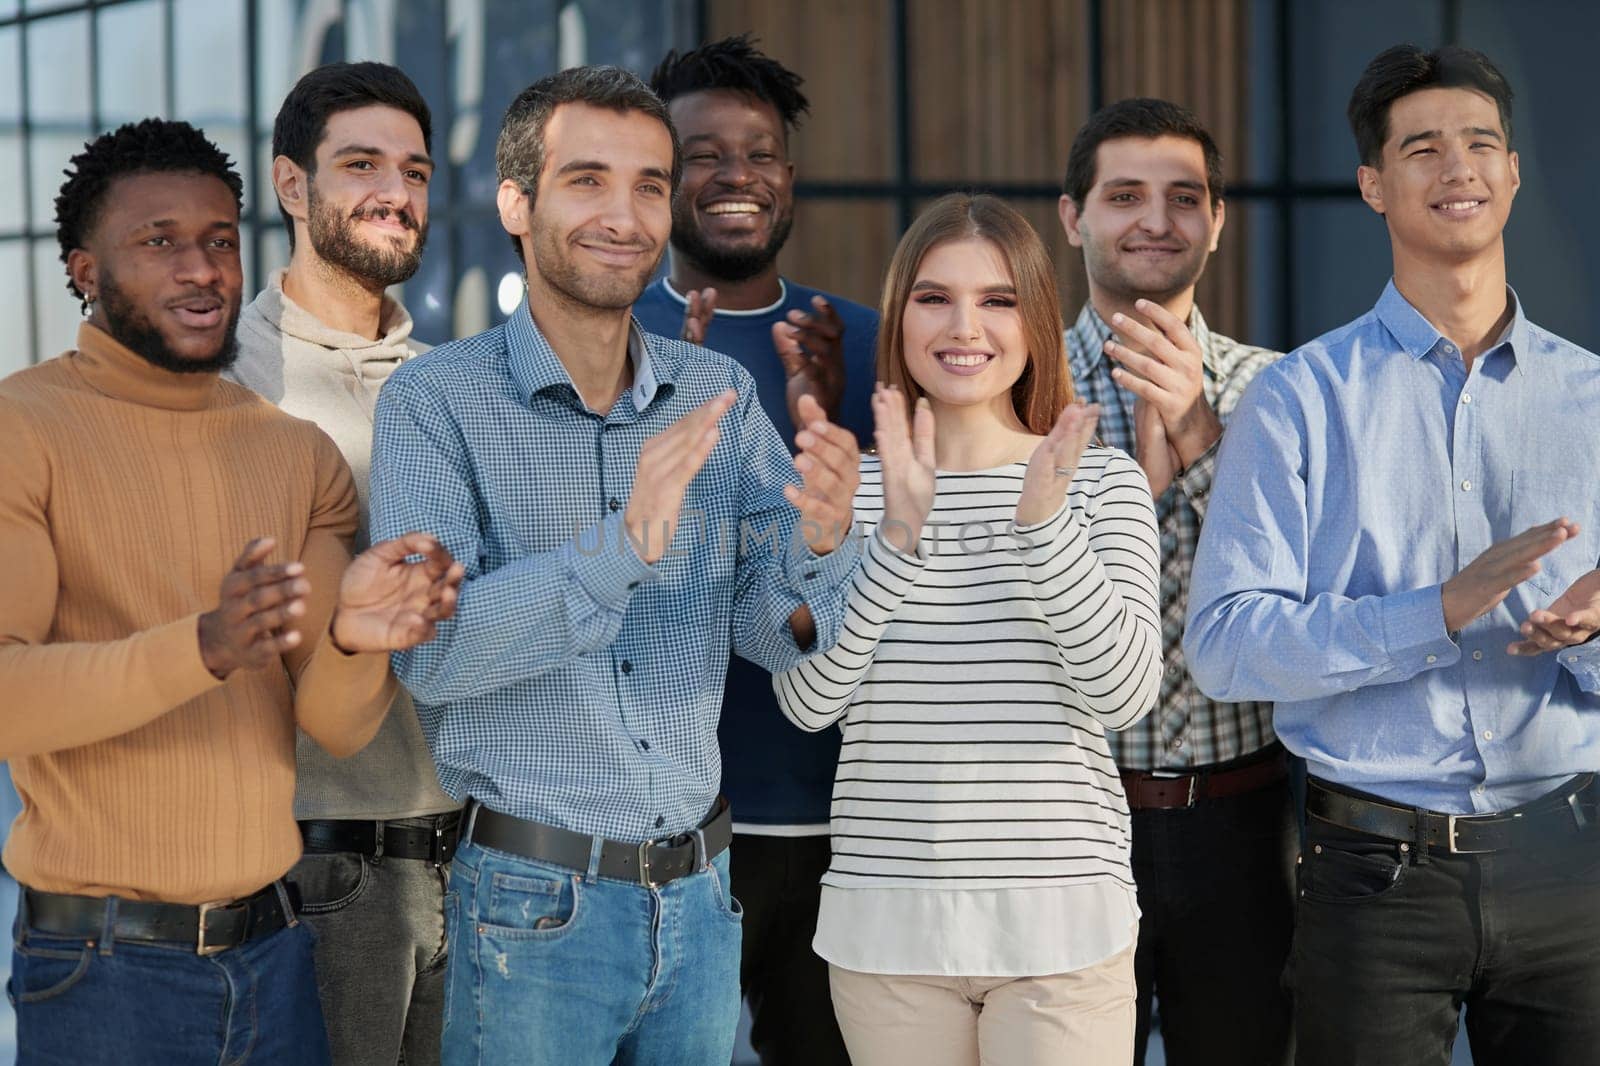 Human resources. Group portrait of smiling employees of a friendly team of different racial genders standing together in an office.